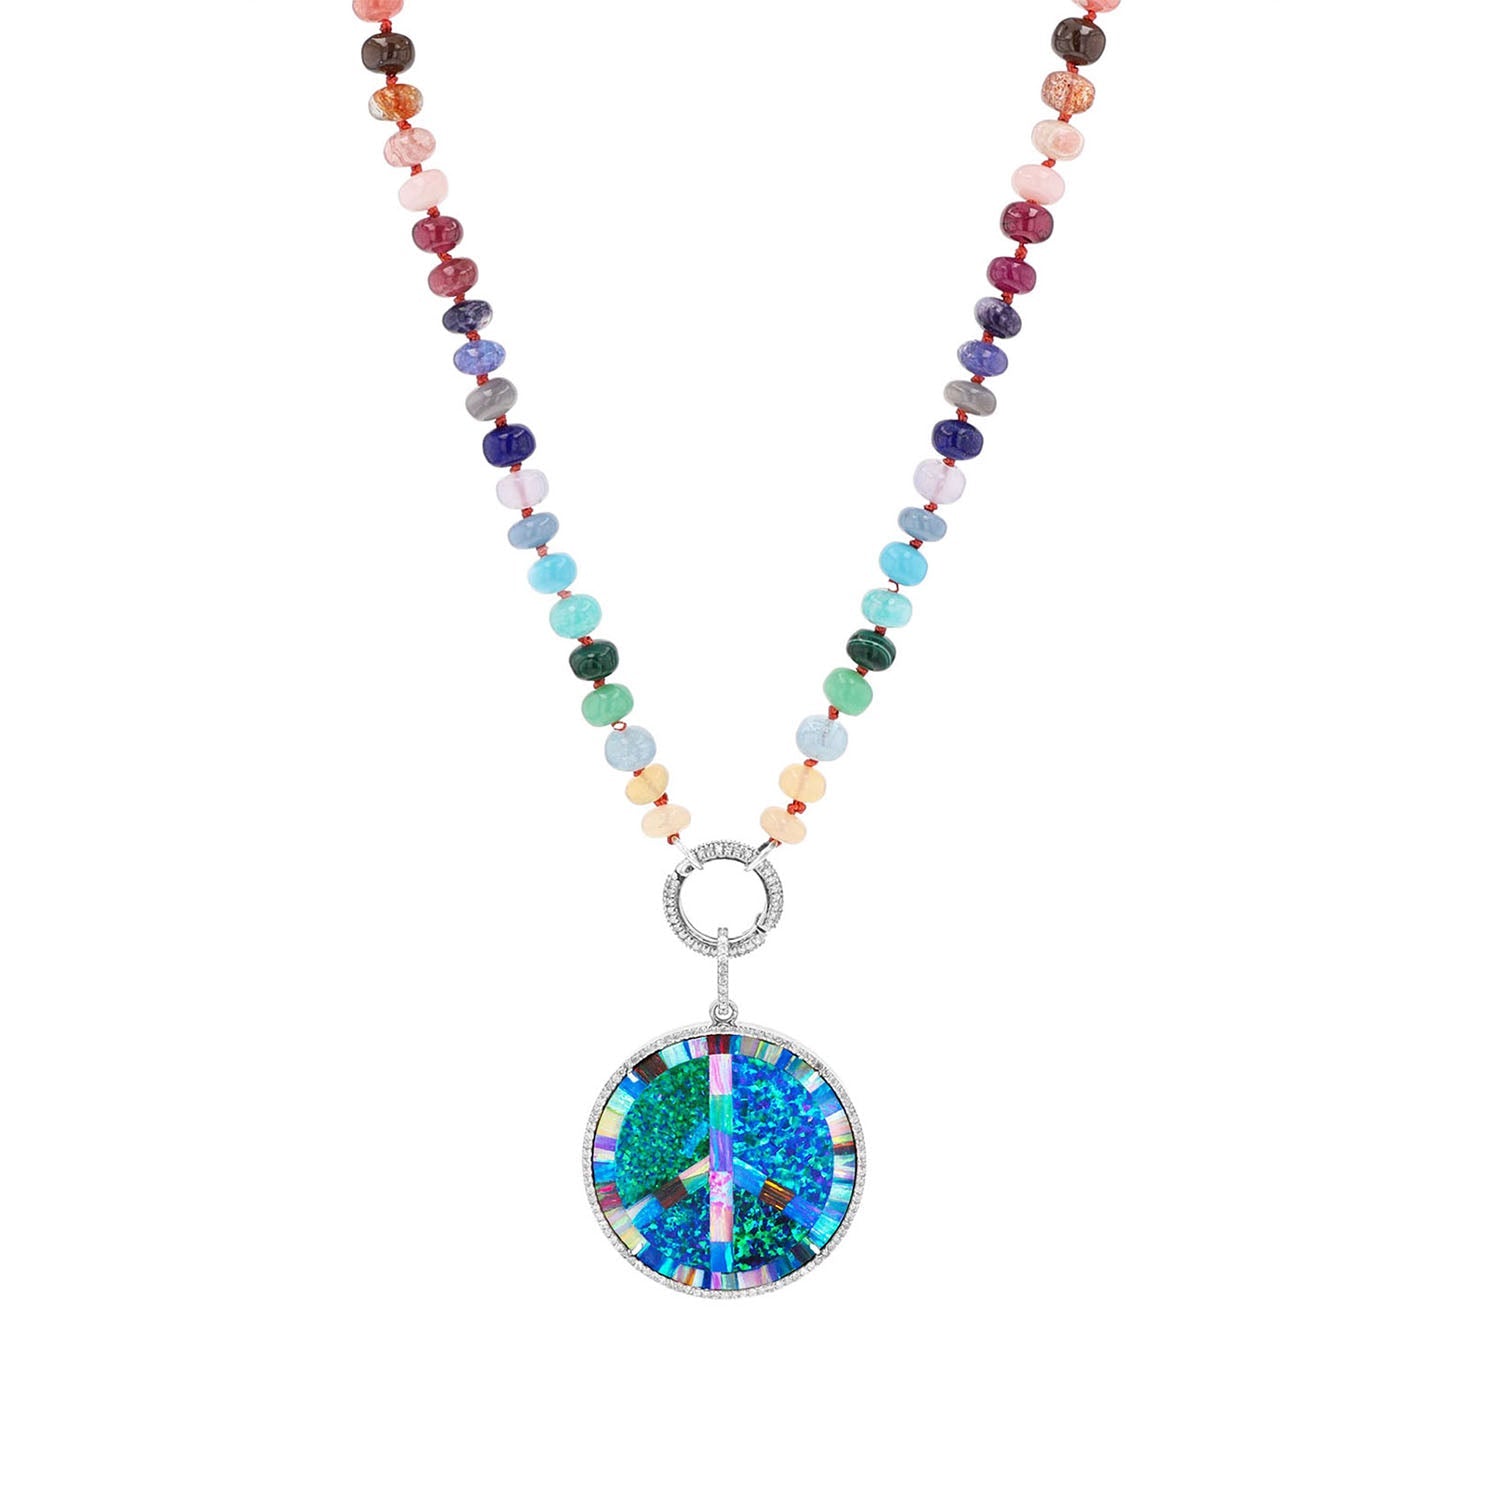 Opal Inlay and Diamond Peace Pendant on Rainbow Gemstone Mix Knotted Necklace - 18"  N0003543 - TBird